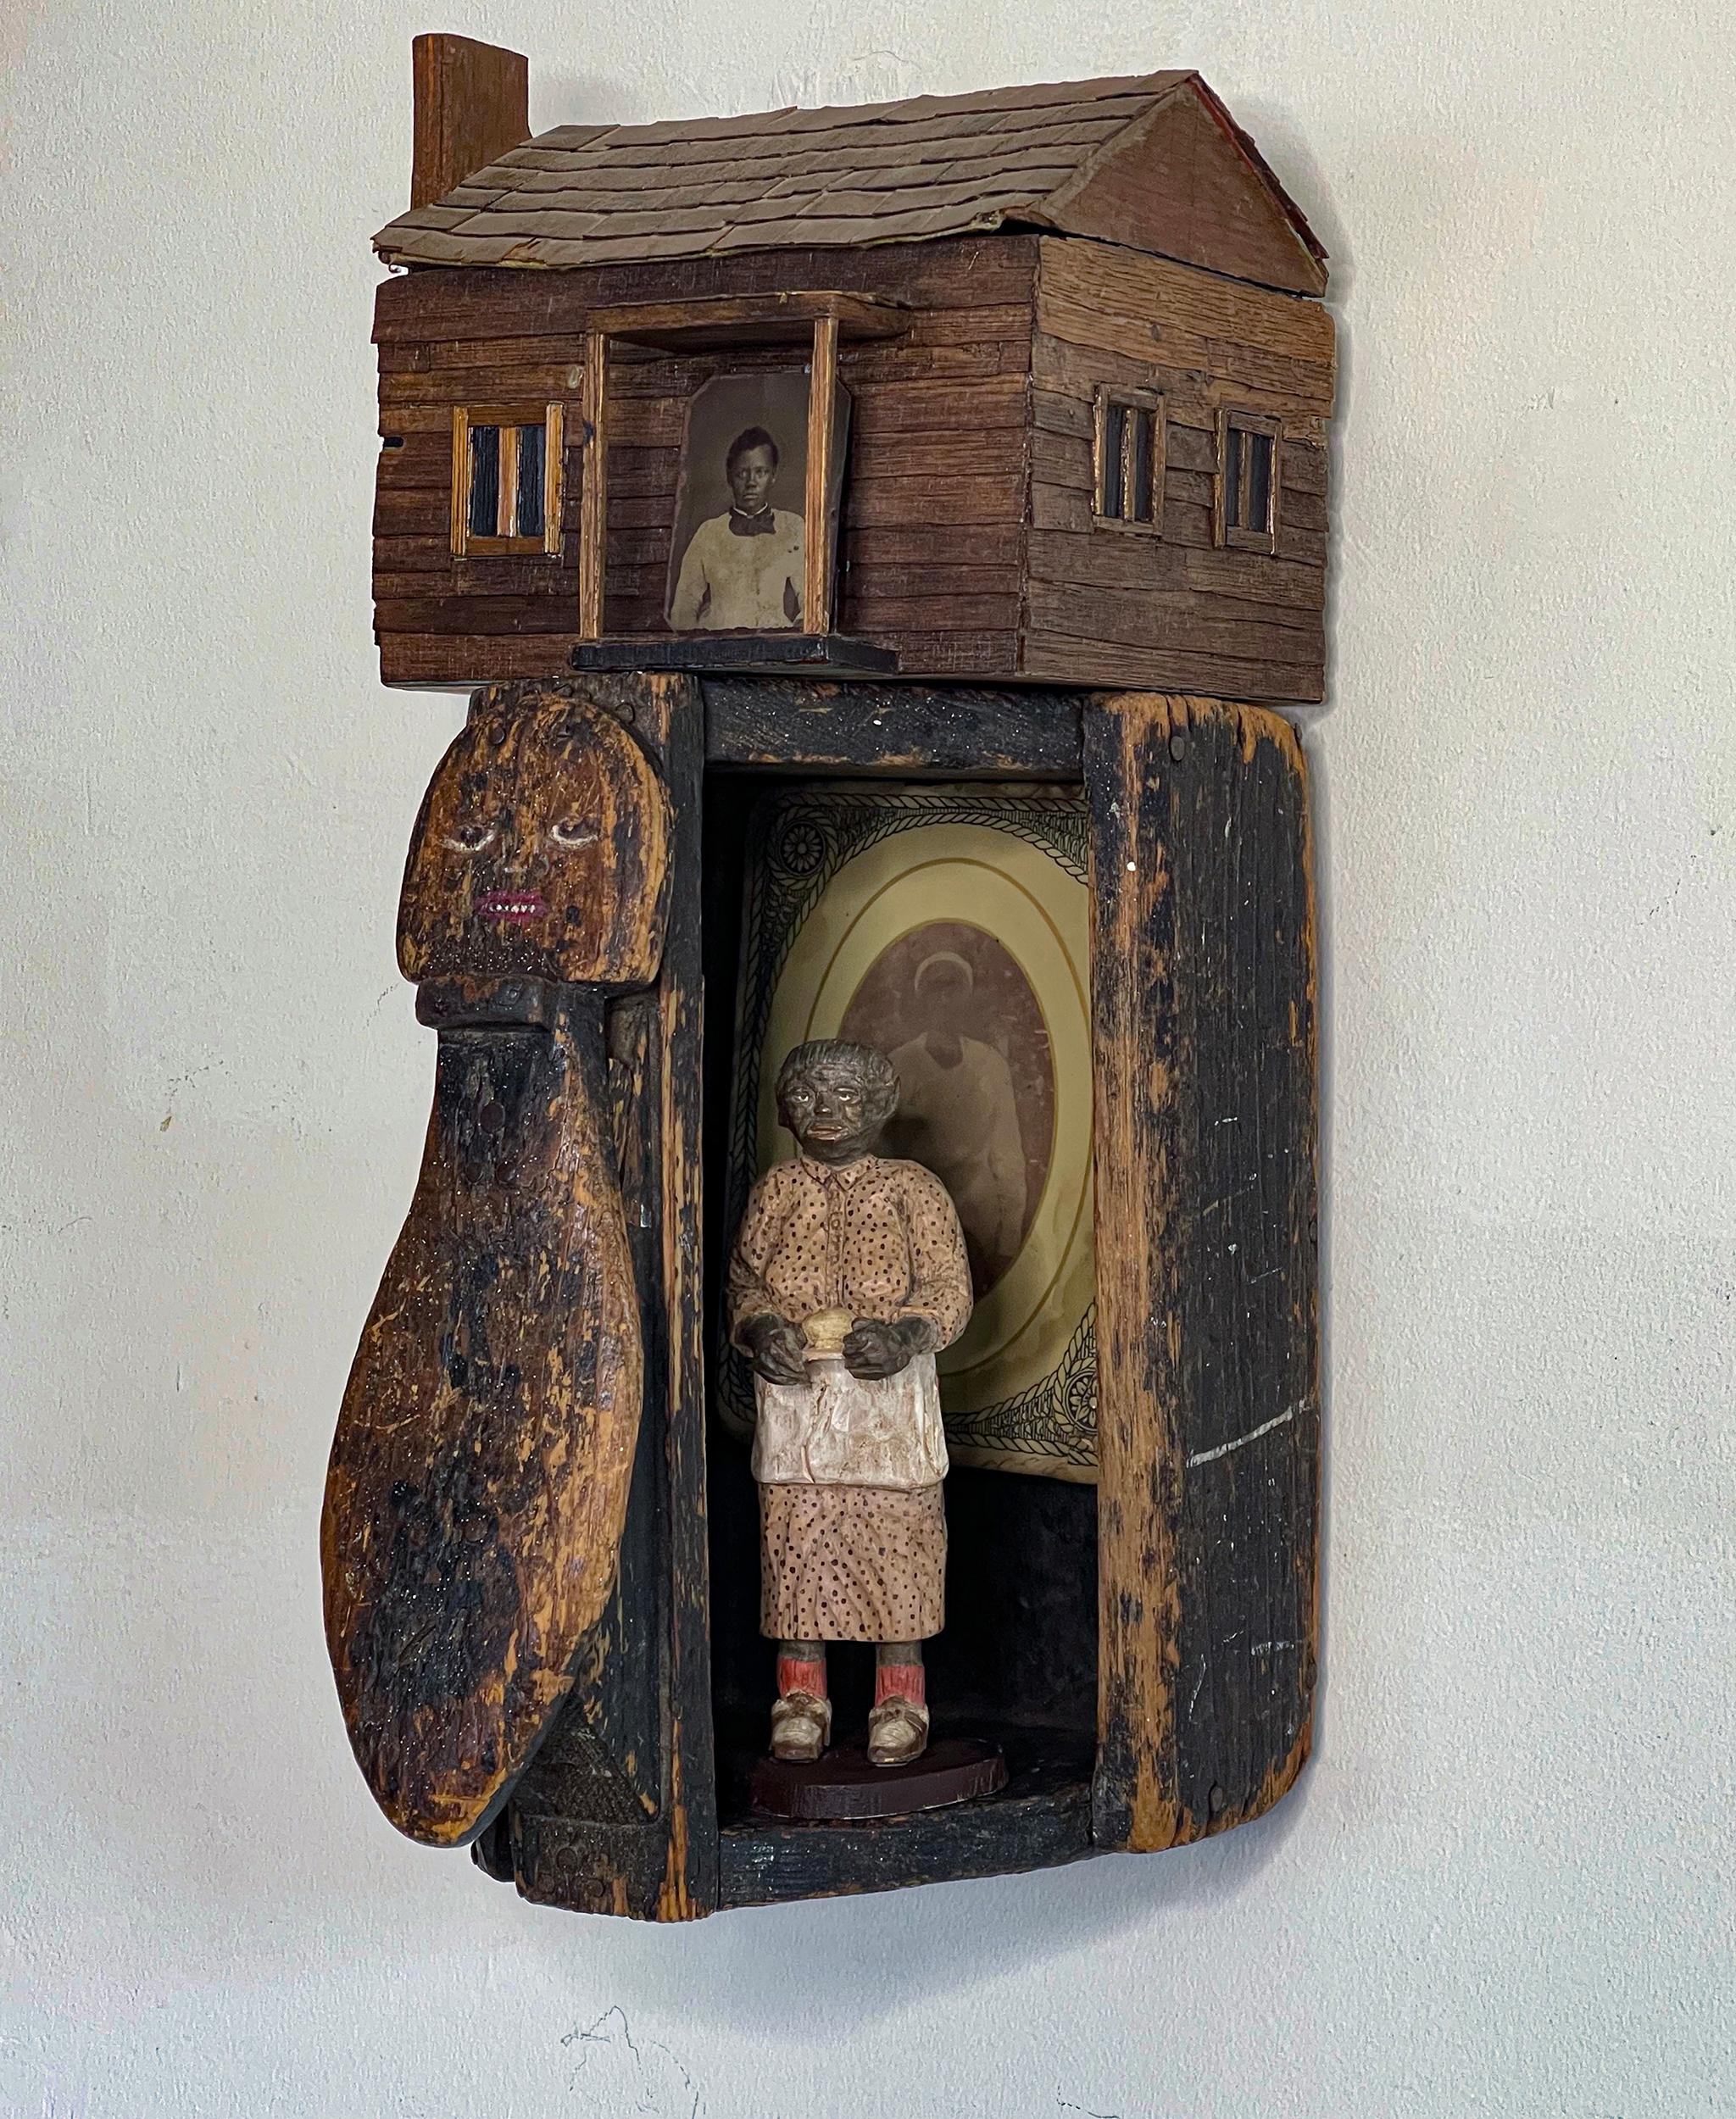 American Story No.1921 - Sculpture by Kat Flyn